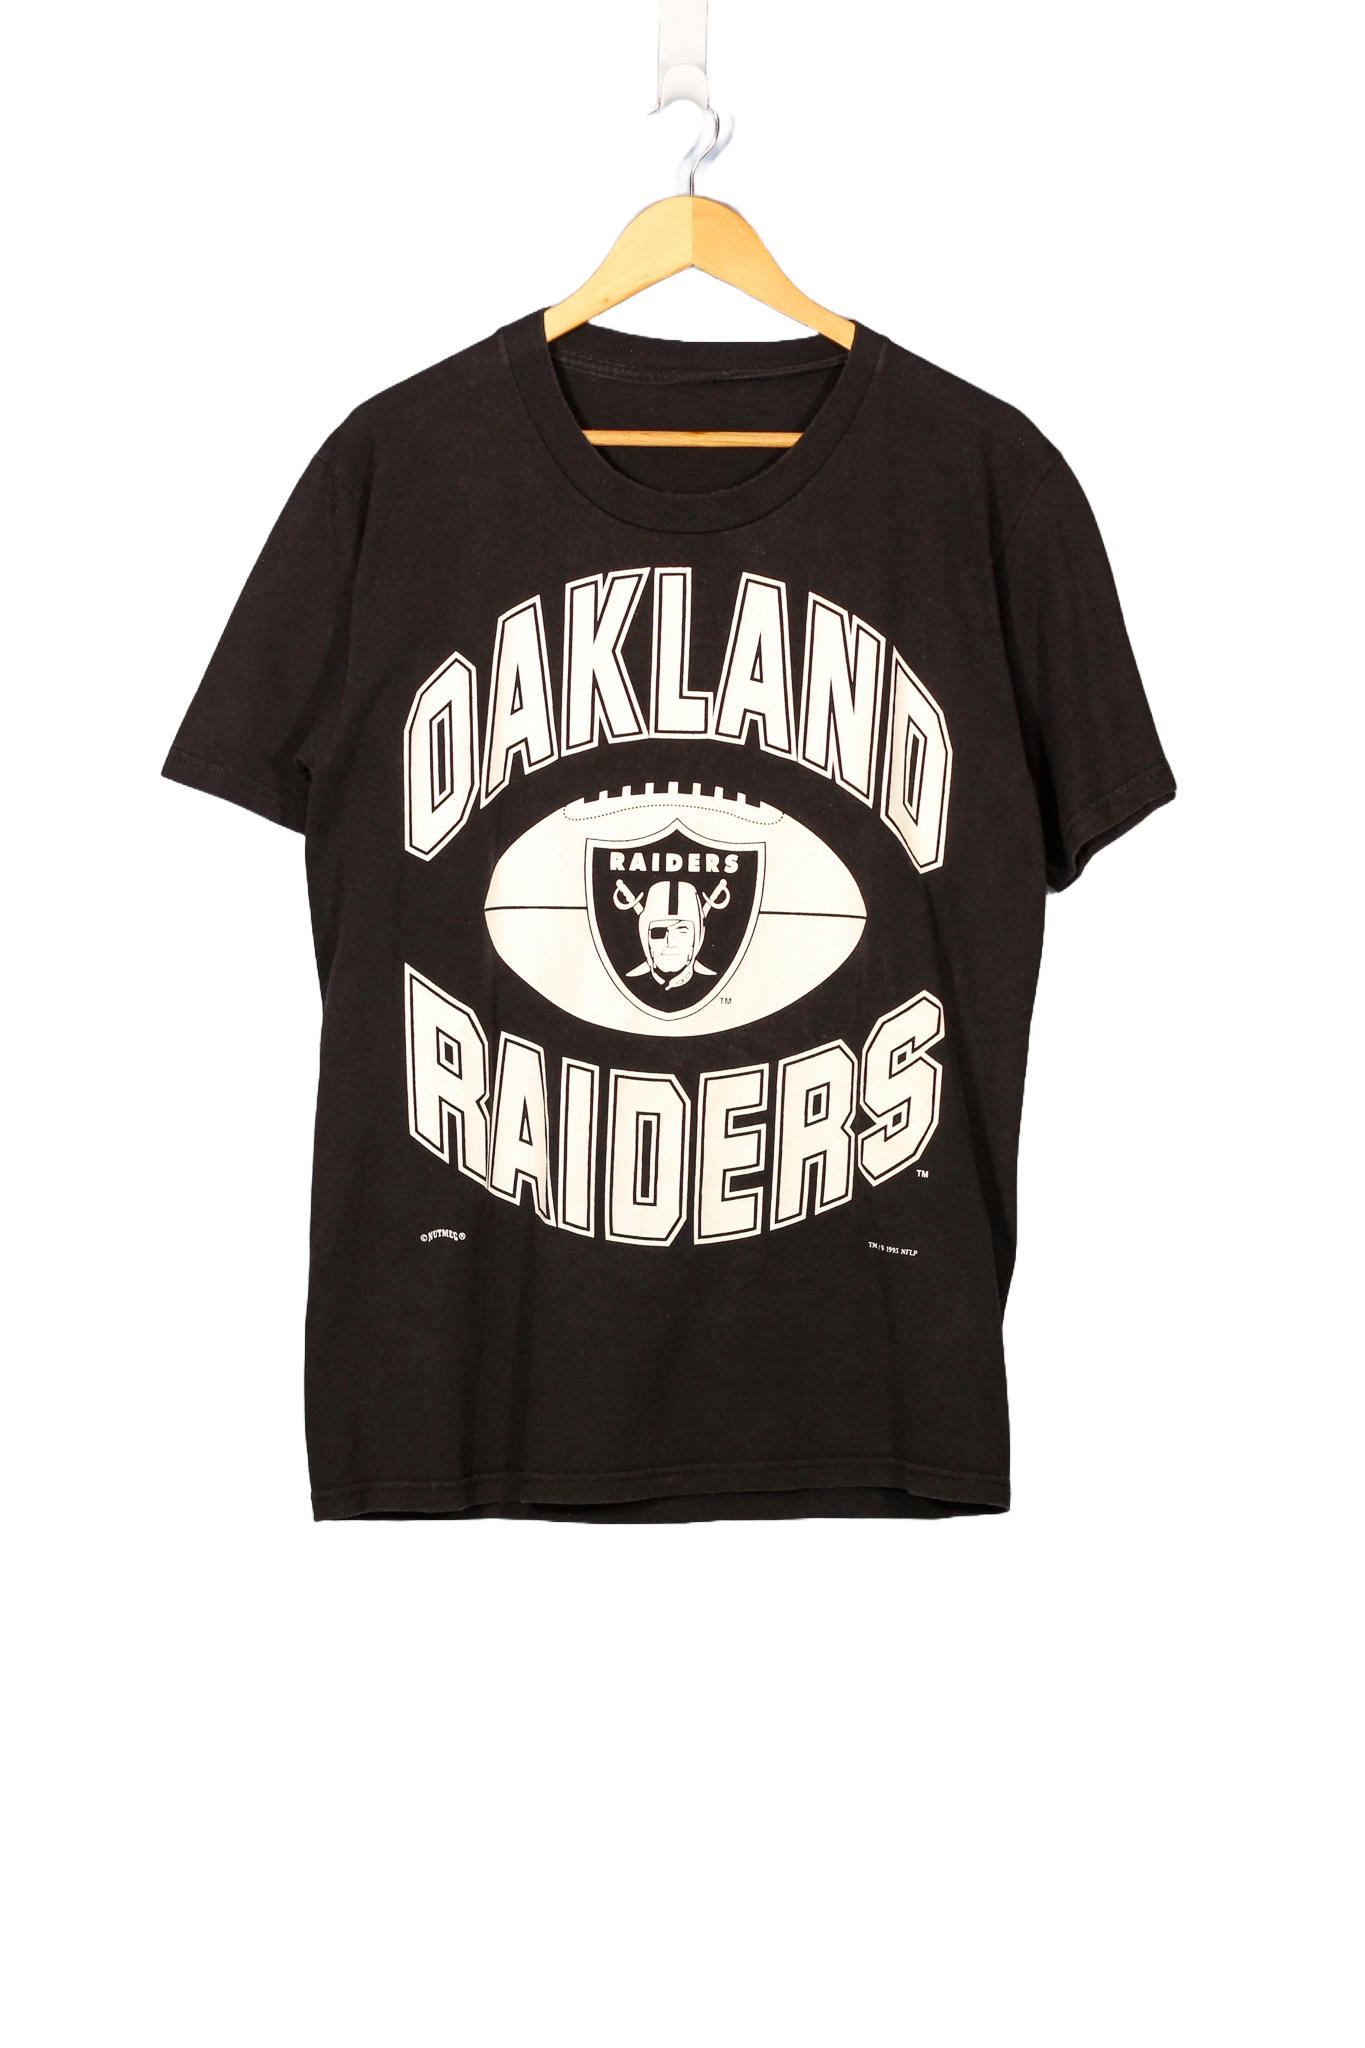 Vintage 1995 Oakland Raiders Spell Out NFL T-Shirt - M